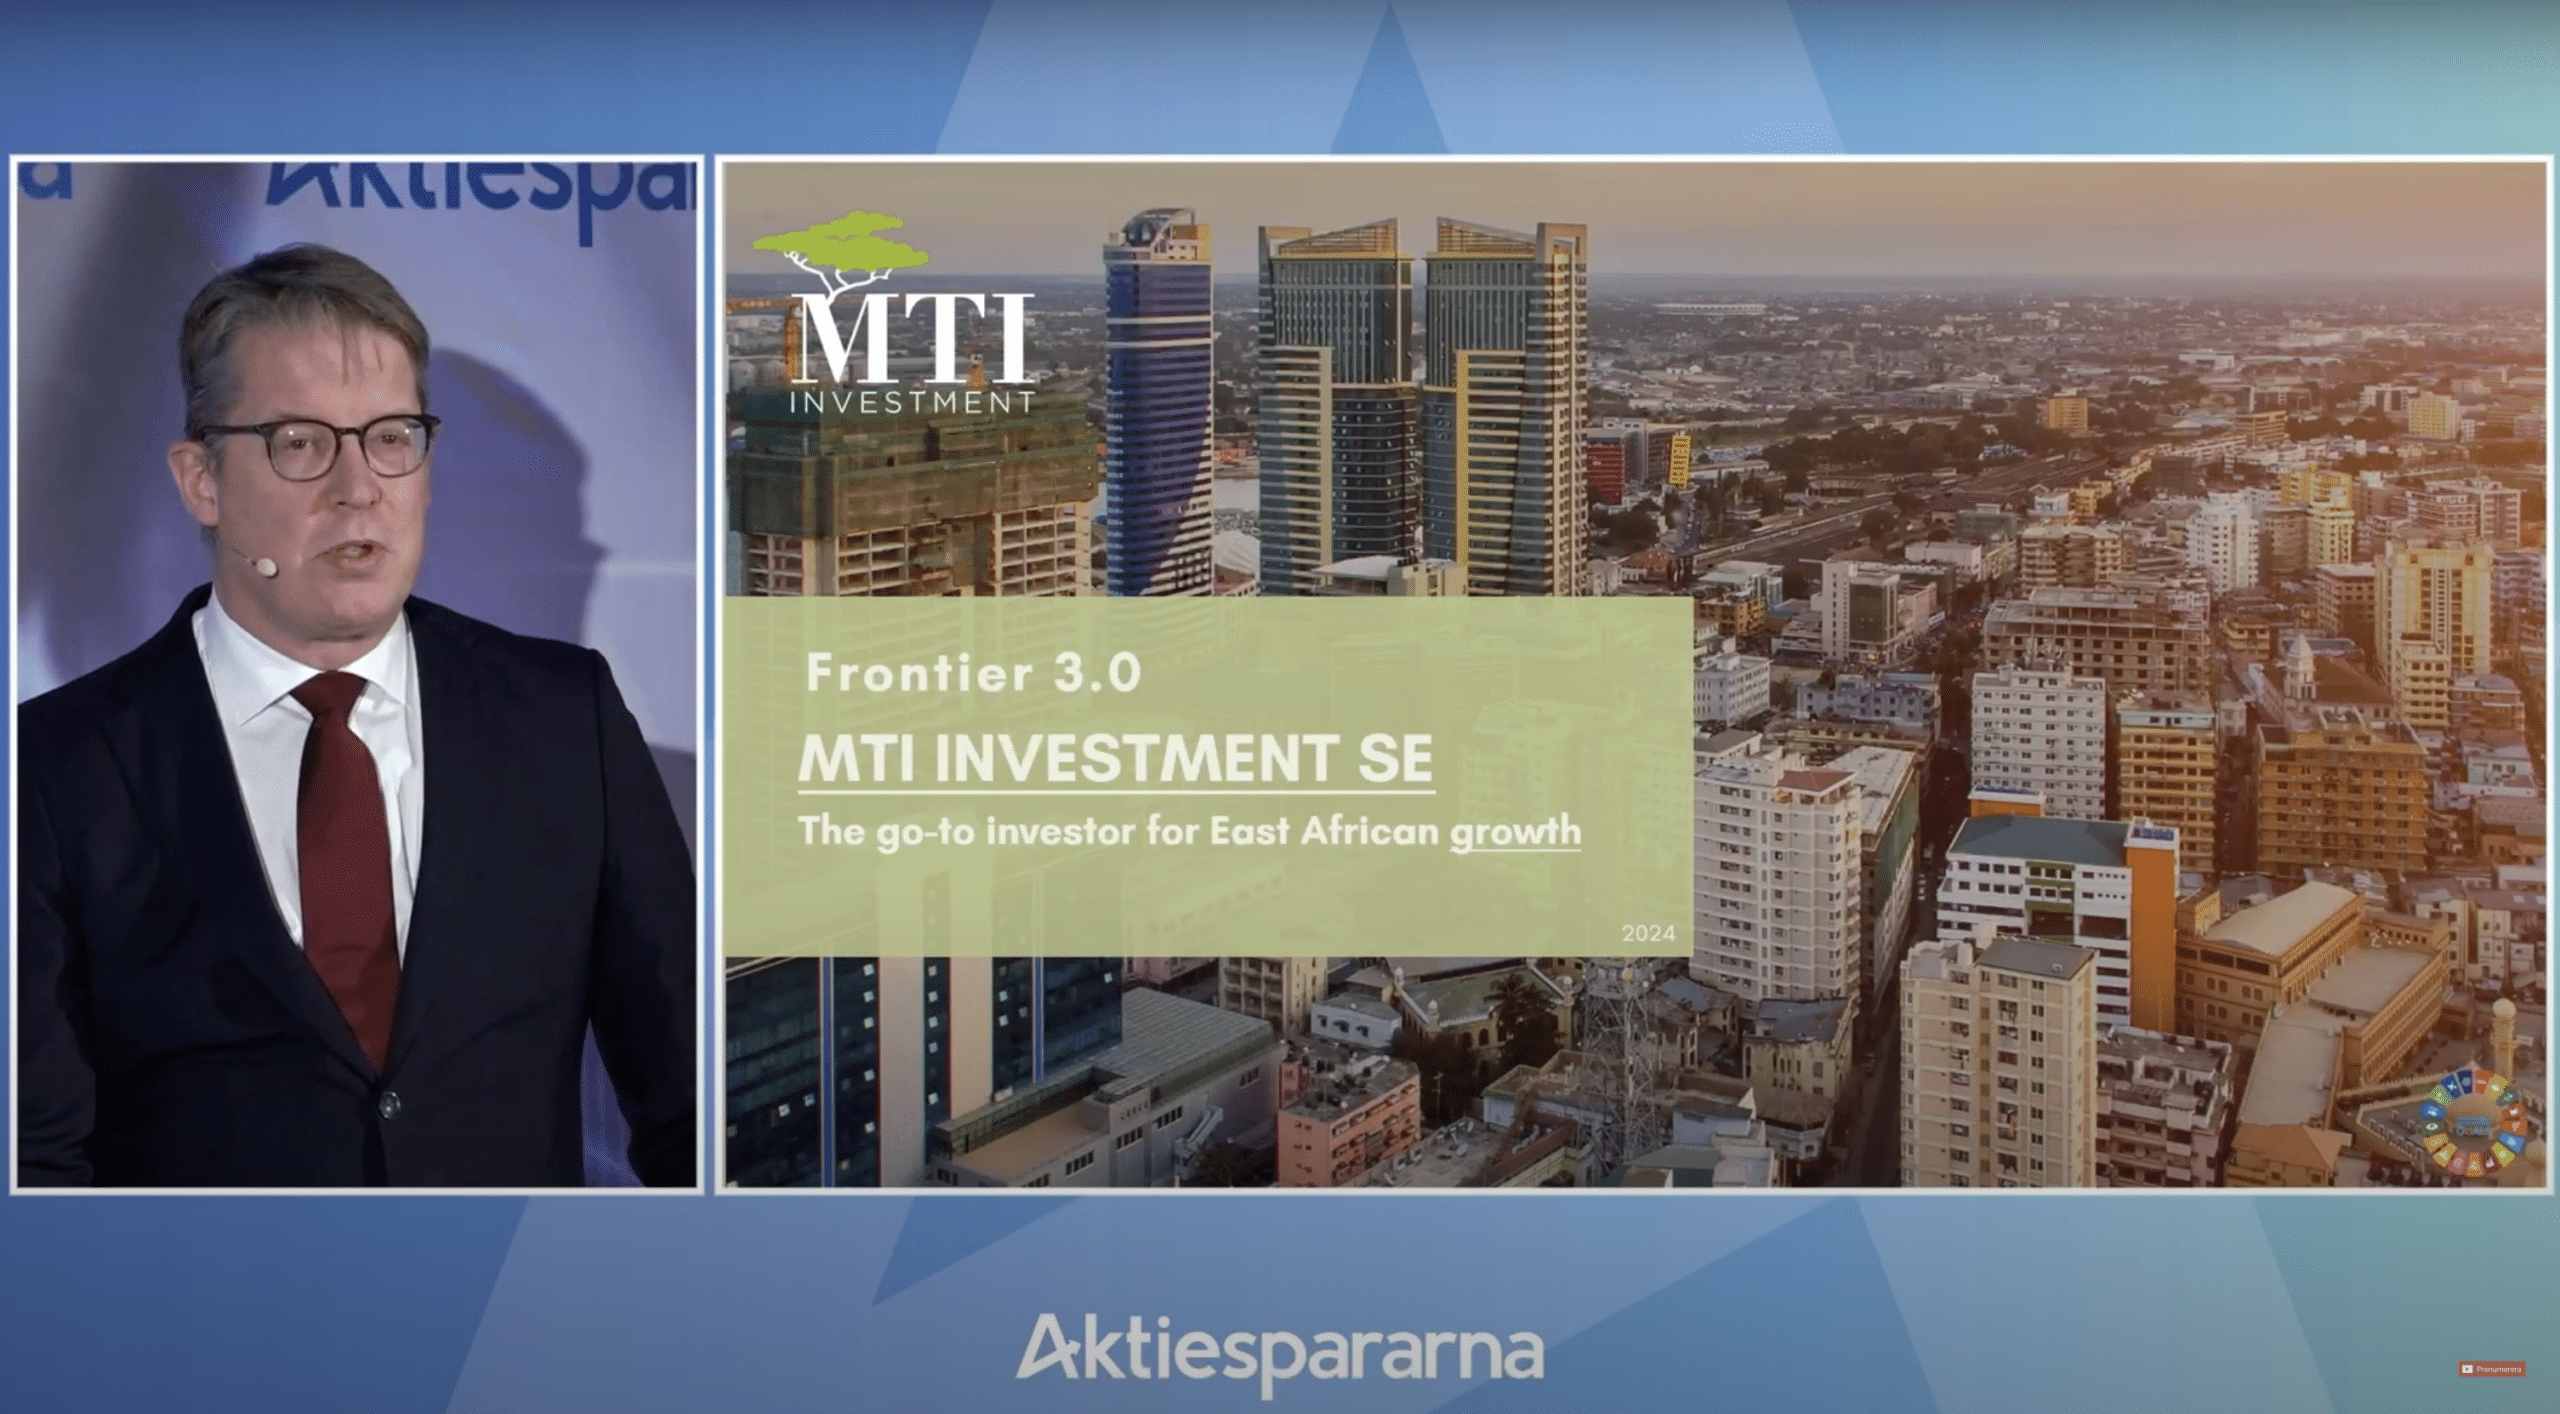 MTI investment co founder running a conference about the go-to investor for East African growth